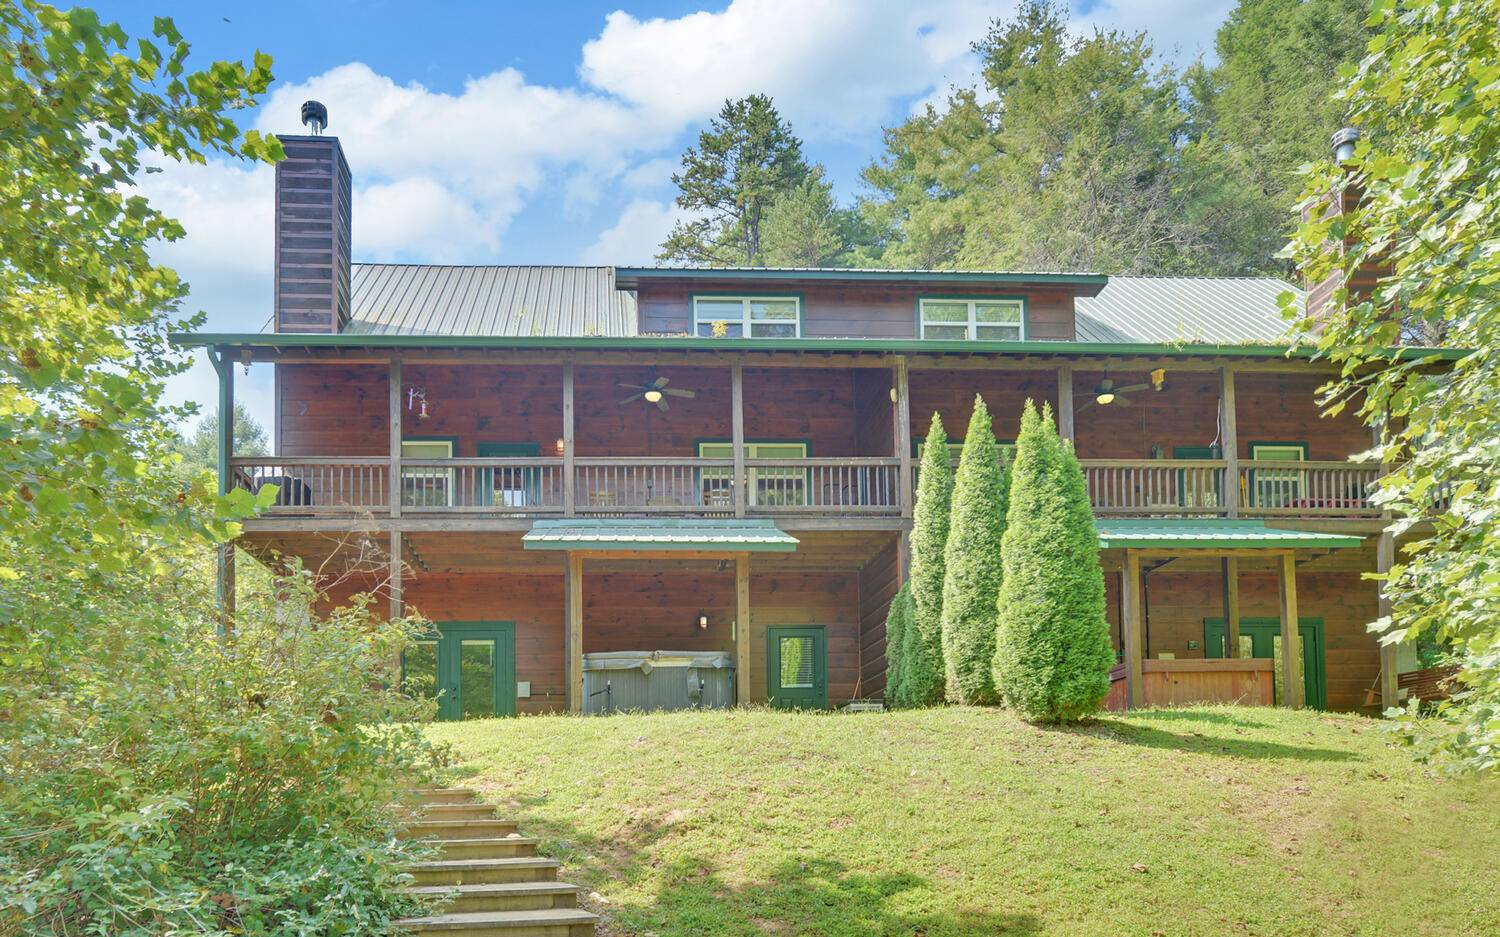 Walk down just a few feet to the Trout Capital of Georgia's famous Toccoa River. Beautiful view of the river, large 3-bedroom home with 3 full baths, fully equipped with everything you see in the cabin. 11 beautiful acres of common grounds. Beautiful rock real wood fireplace, The $300. monthly maintenance fee covers water, sewer, exterior building maintenance, structural insurance for fire, storm damage. Also covers monthly grounds maintenance, pest control termite protection. Everything on the exterior of this building is covered through the HOA maintenance fee. No rental restrictions from the HOA.